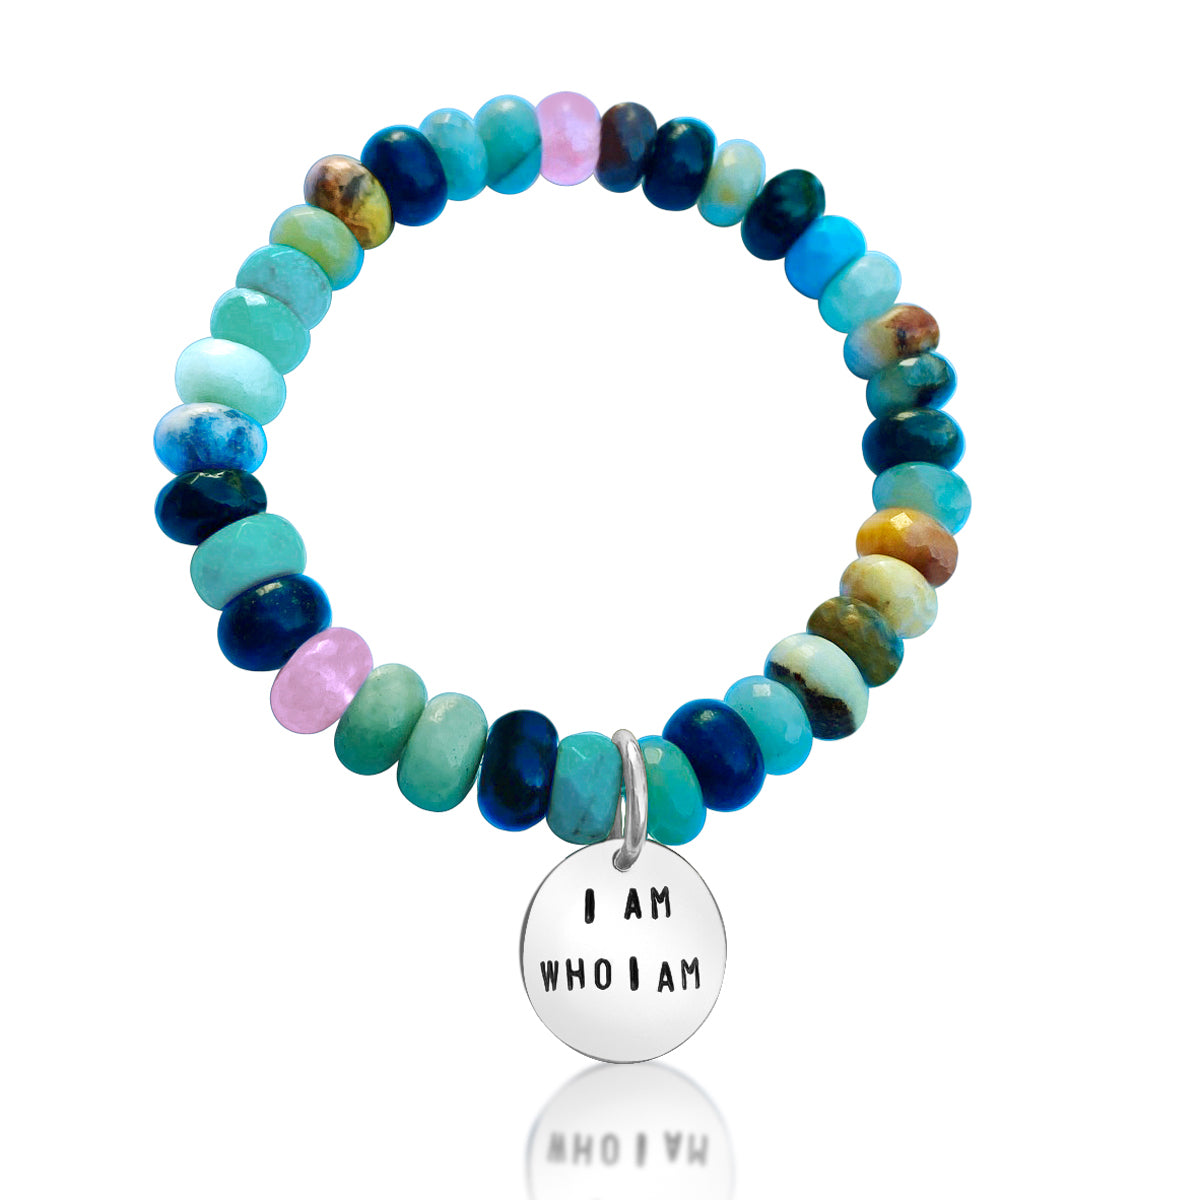 I am who I am Affirmation Bracelet. Mindfulness Bracelet with a Mix of Semi-Precious Chakra Healing Stones.  To be yourself in a world that is constantly trying to make you something else is the greatest accomplishment. 